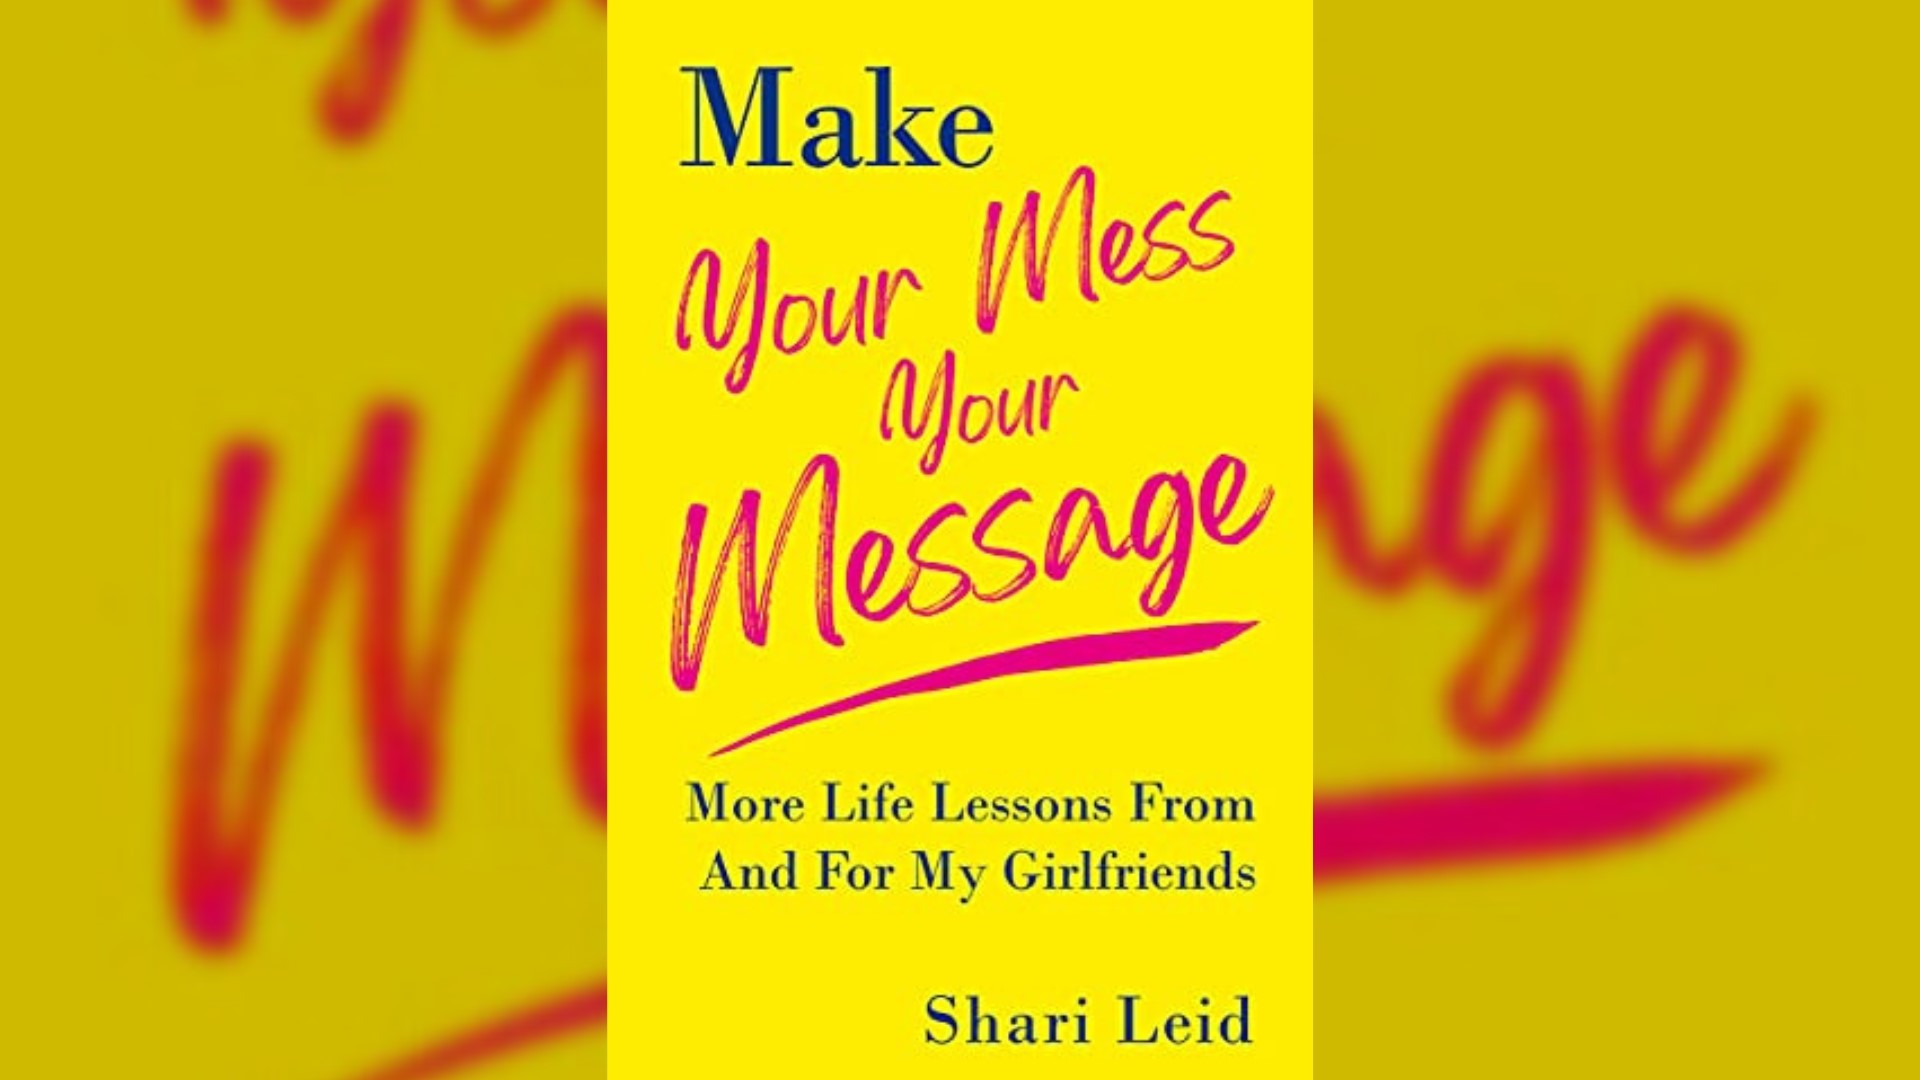 Shari Leid's book "Make Your Mess Your Message" is about embracing life's messy moments and finding messages of purpose for ourselves. #newdaynw